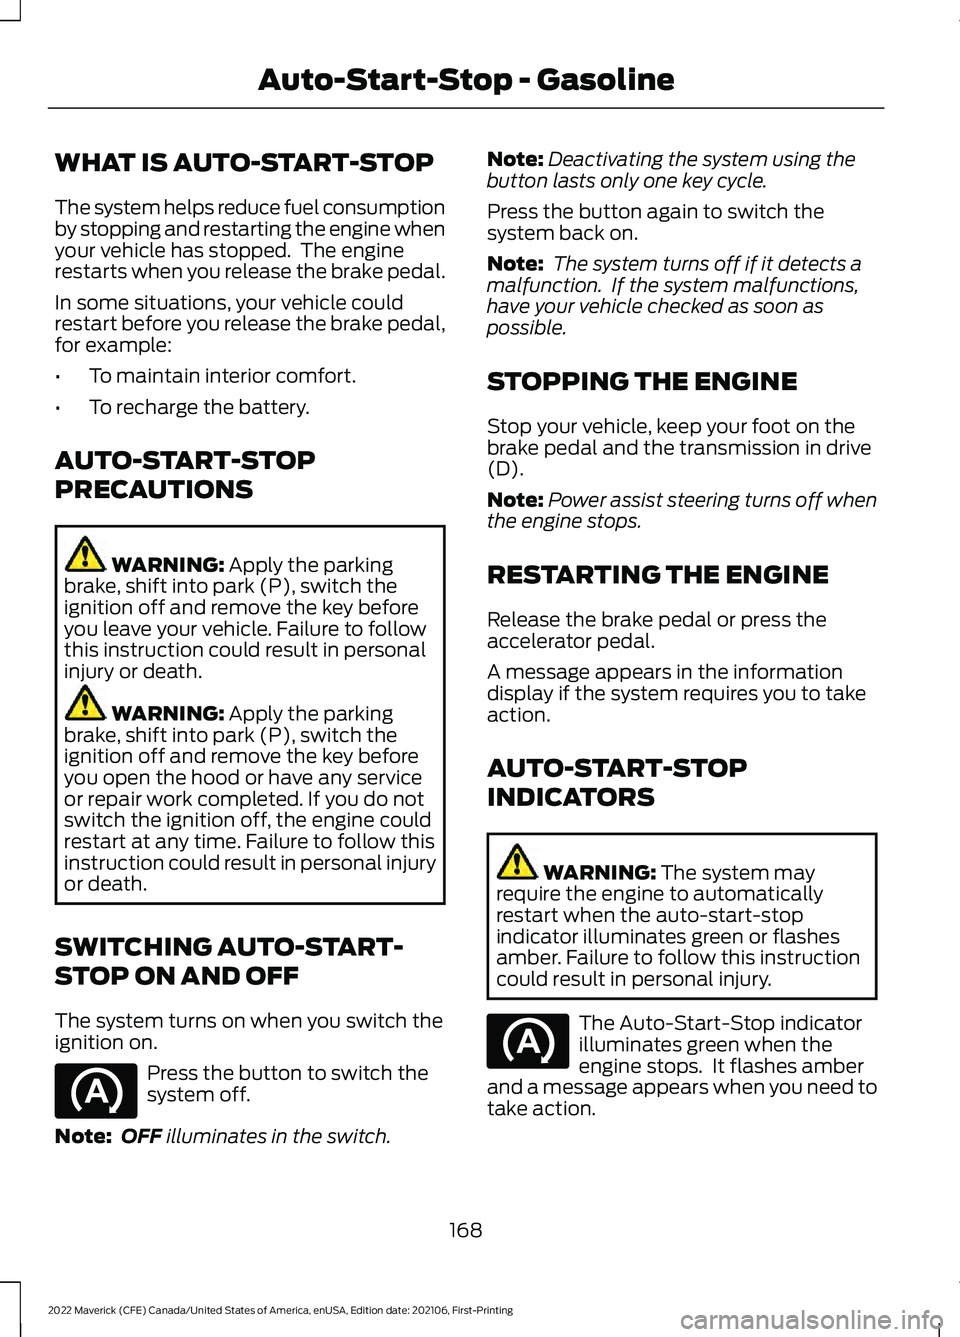 FORD MAVERICK 2022  Owners Manual WHAT IS AUTO-START-STOP
The system helps reduce fuel consumption
by stopping and restarting the engine when
your vehicle has stopped.  The engine
restarts when you release the brake pedal.
In some sit